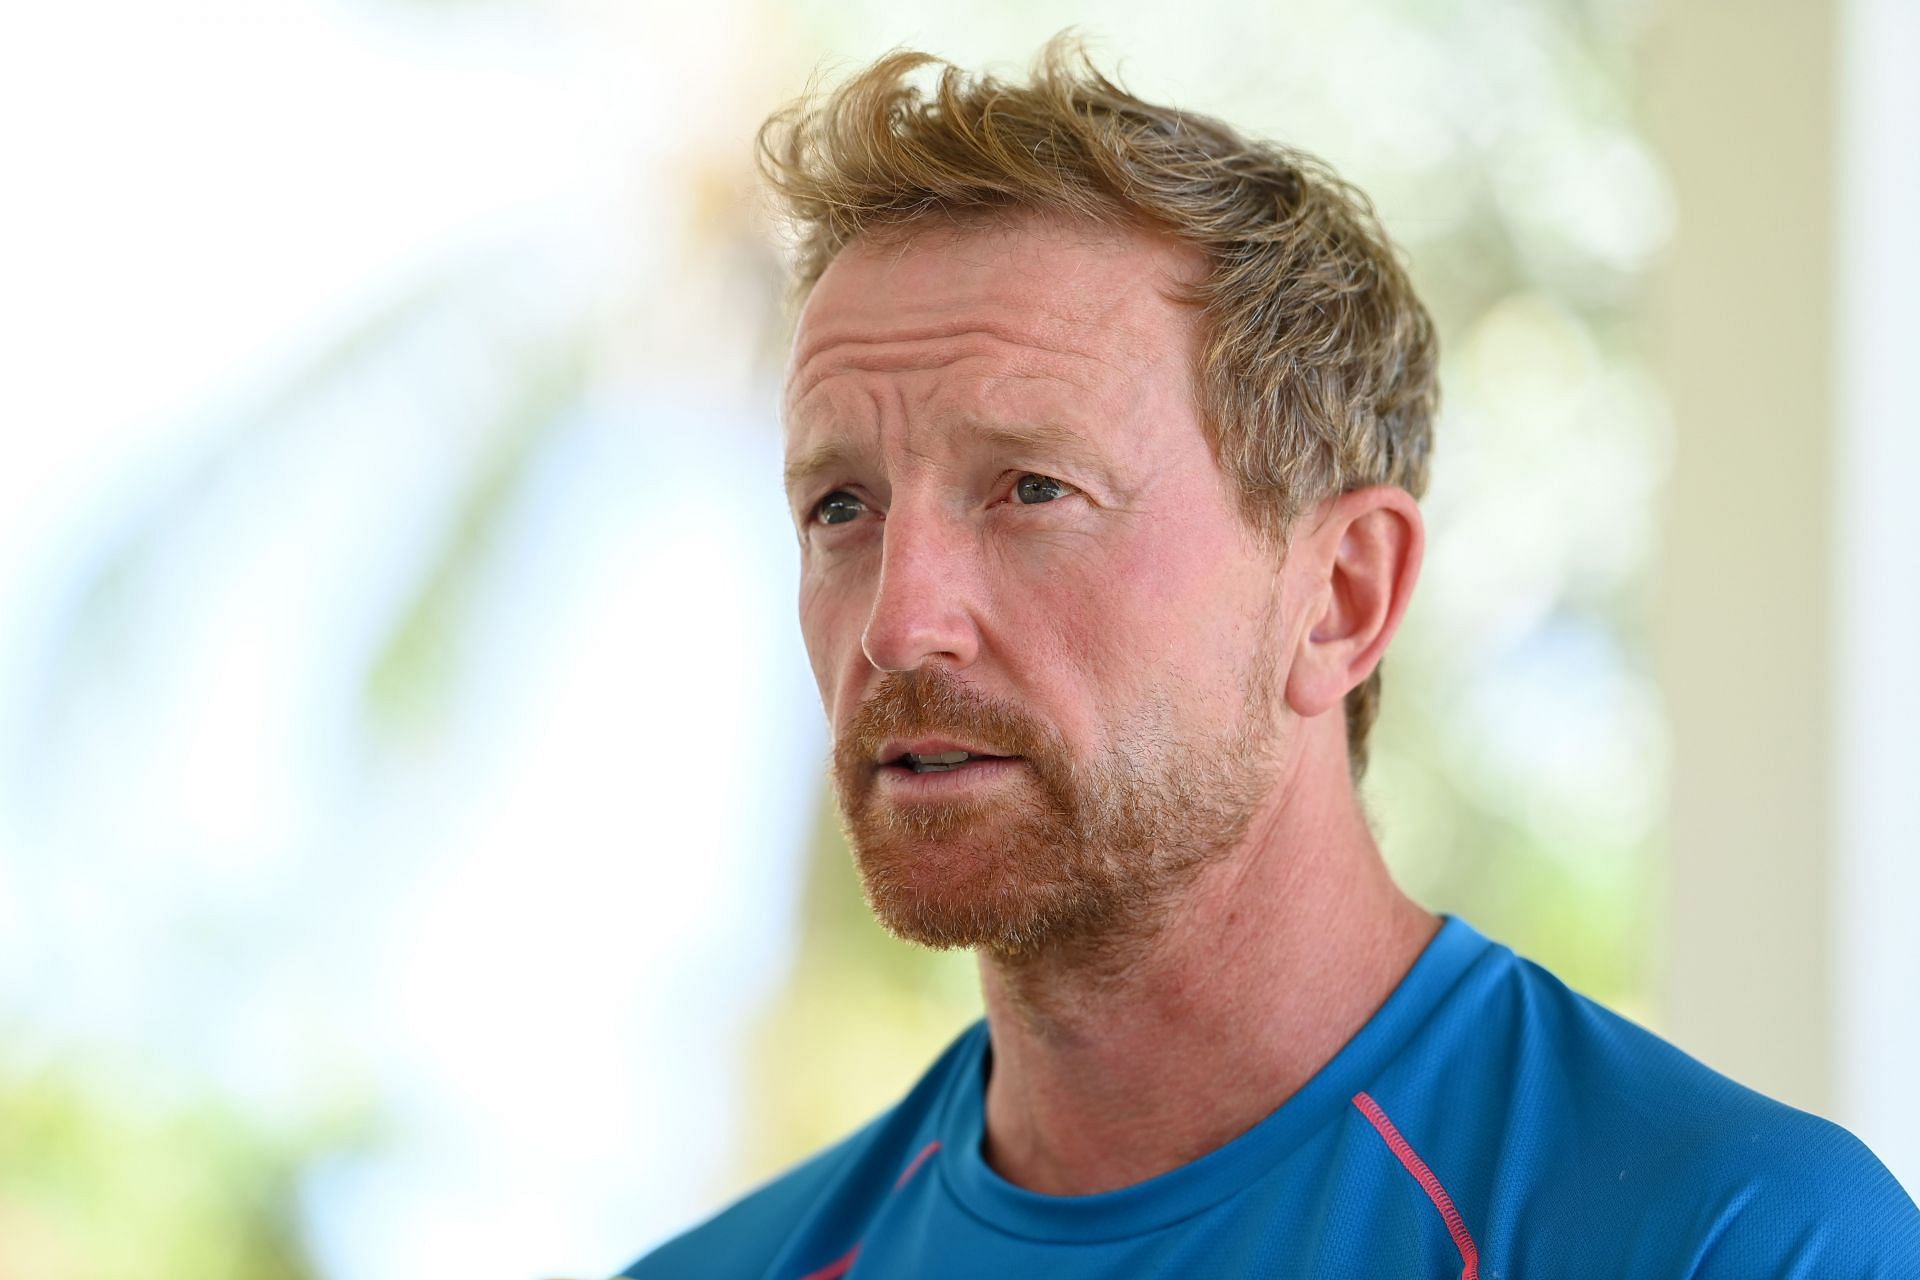 Paul Collingwood asserted that they are trying to play attacking cricket. (Image Credits: Getty)